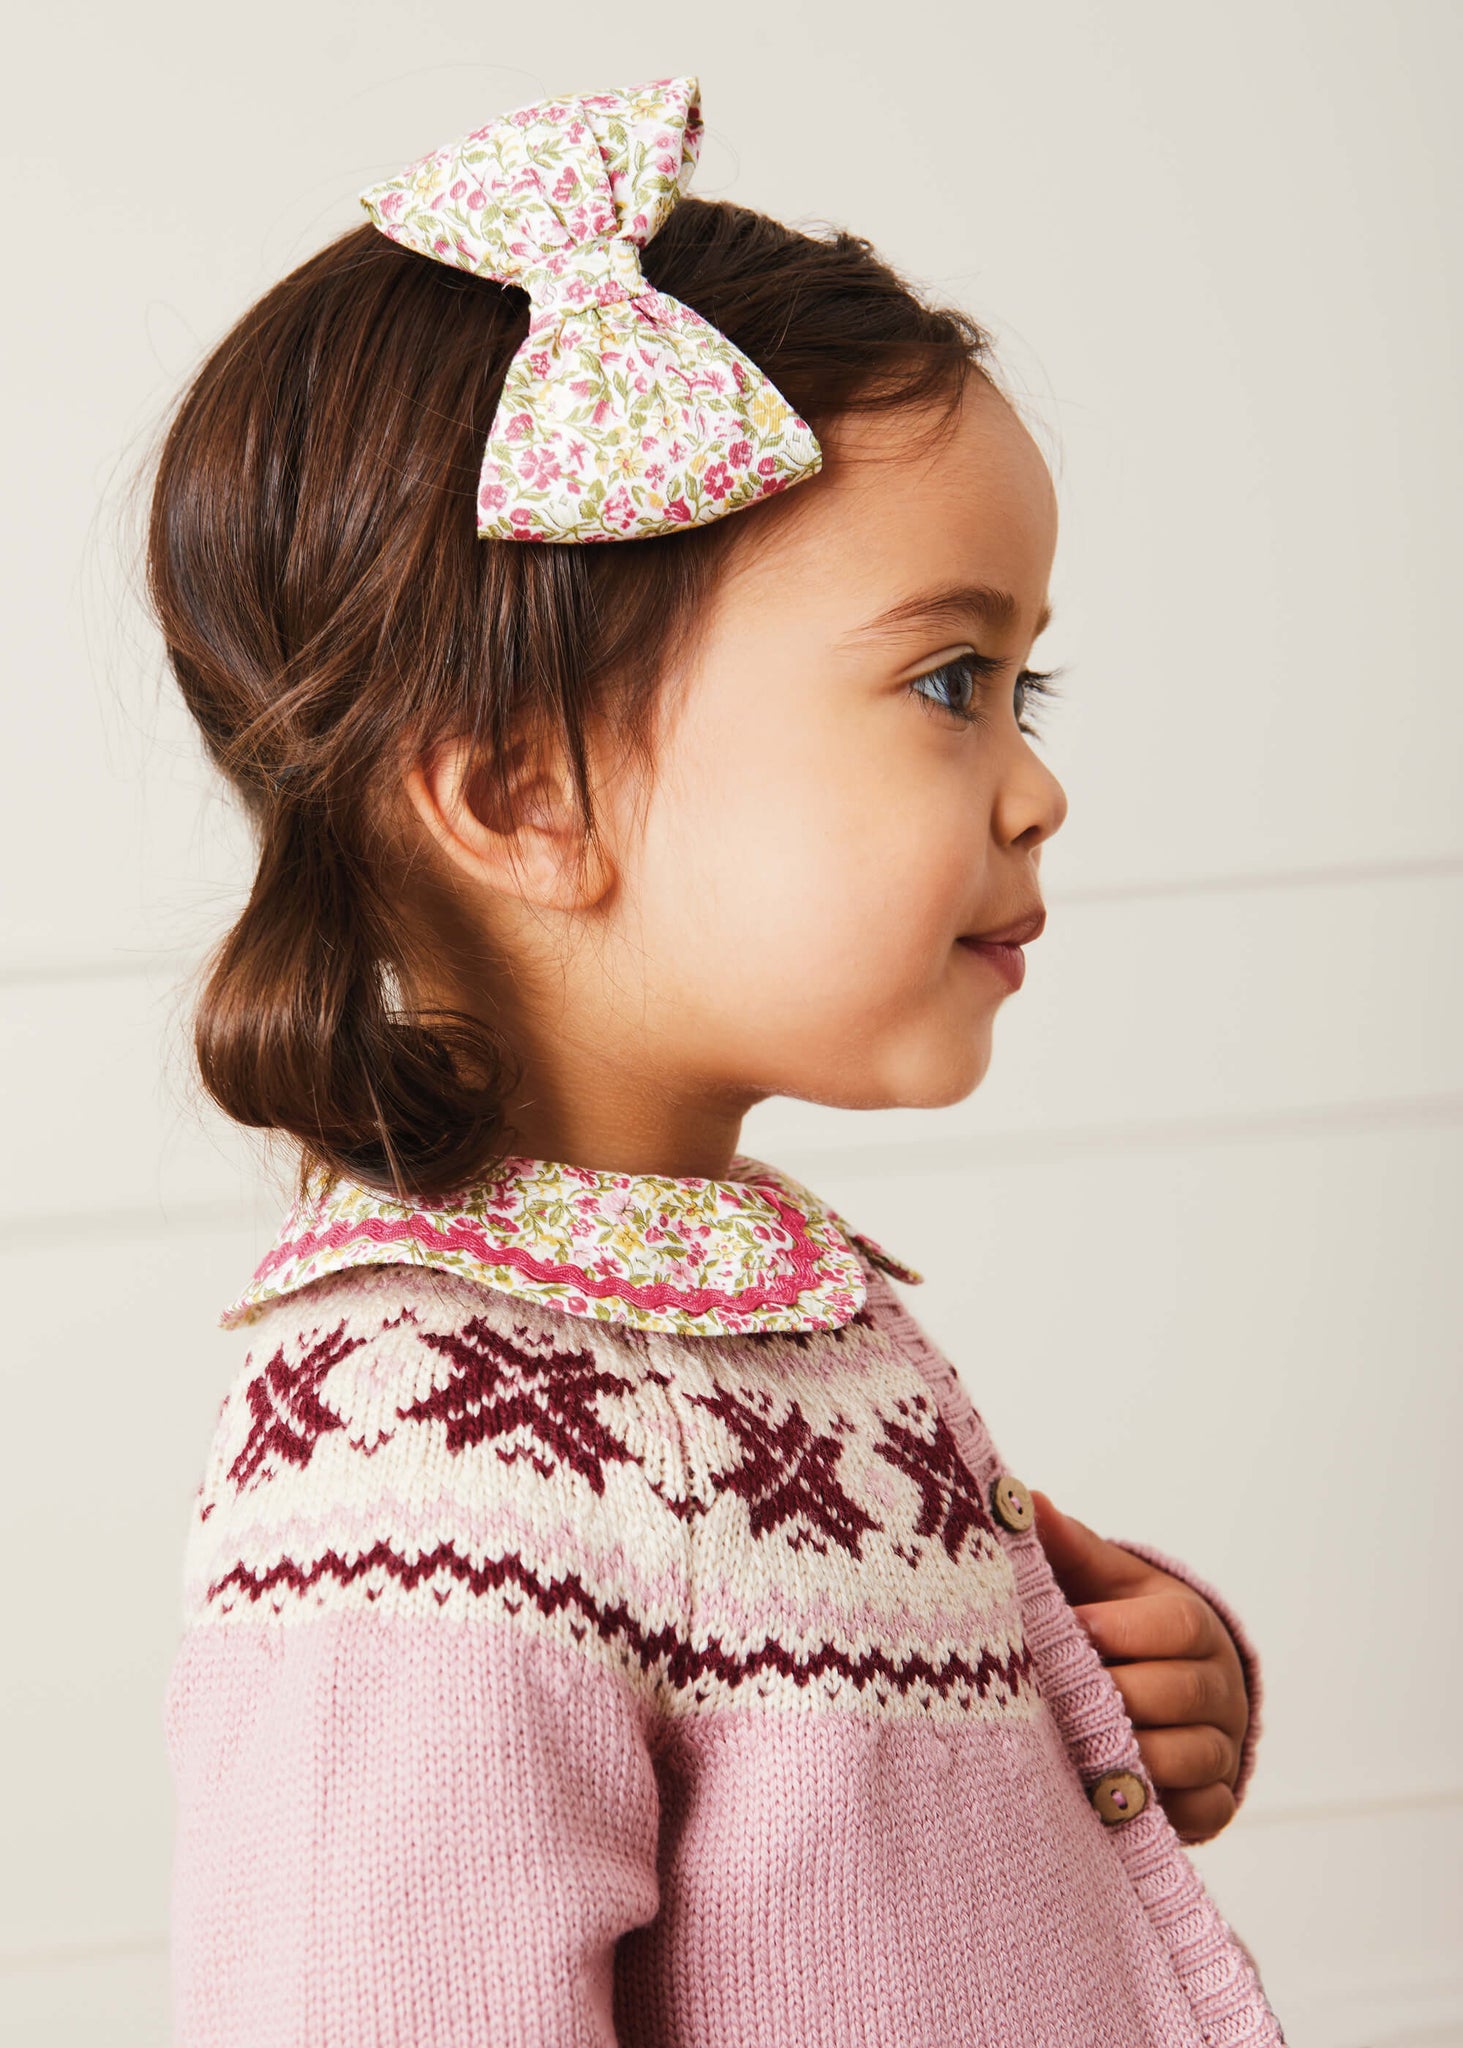 Classic Fair Isle Cardigan With Rib Details in Pink (12mths-10yrs) Knitwear  from Pepa London